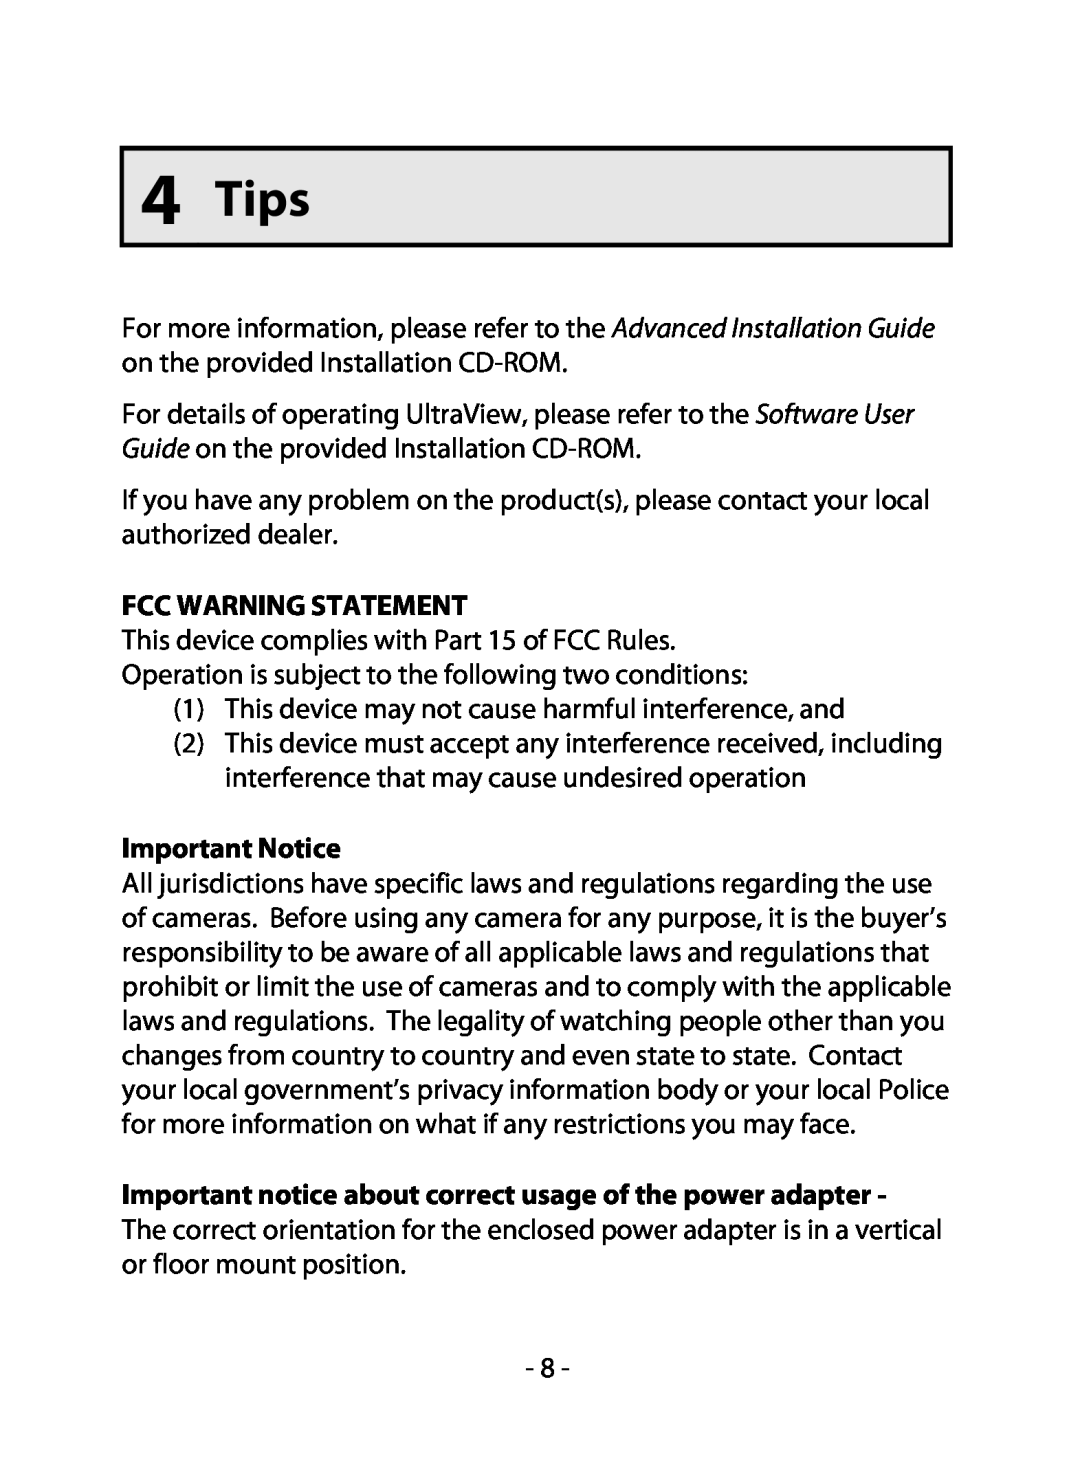 Swann 500 manual Tips, Fcc Warning Statement, Important Notice 